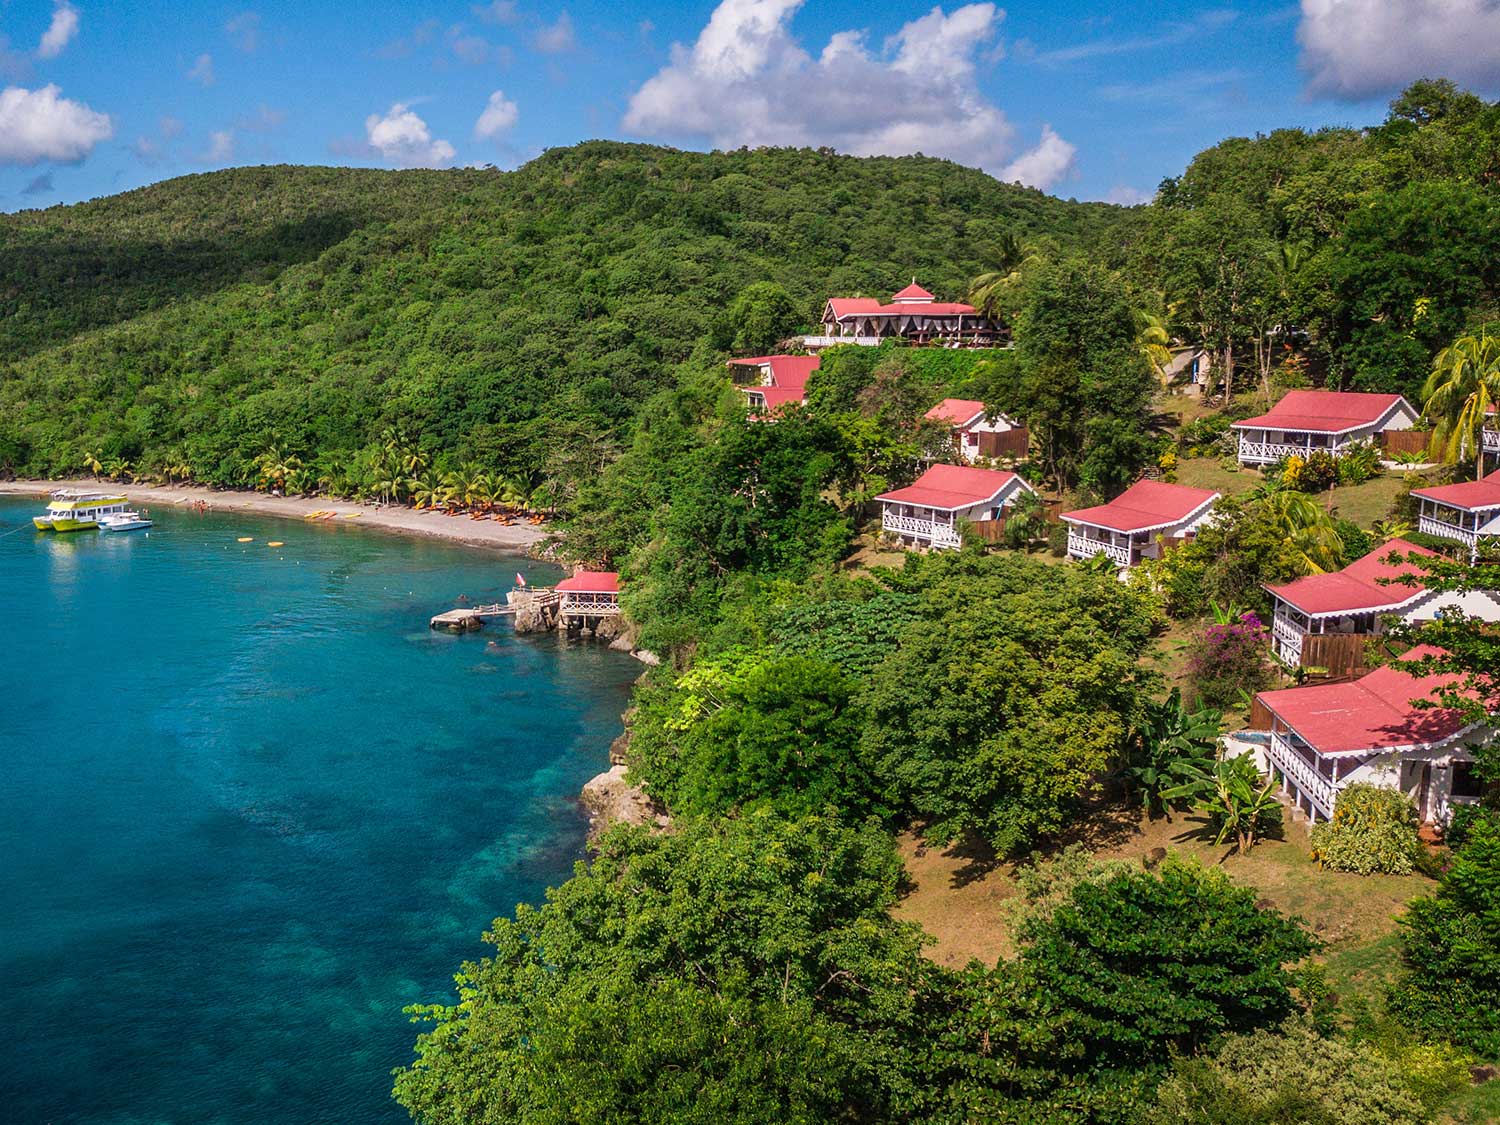 An aerial daytime view of the beach and property at Ti Kaye Resort and Spa in St. Lucia.